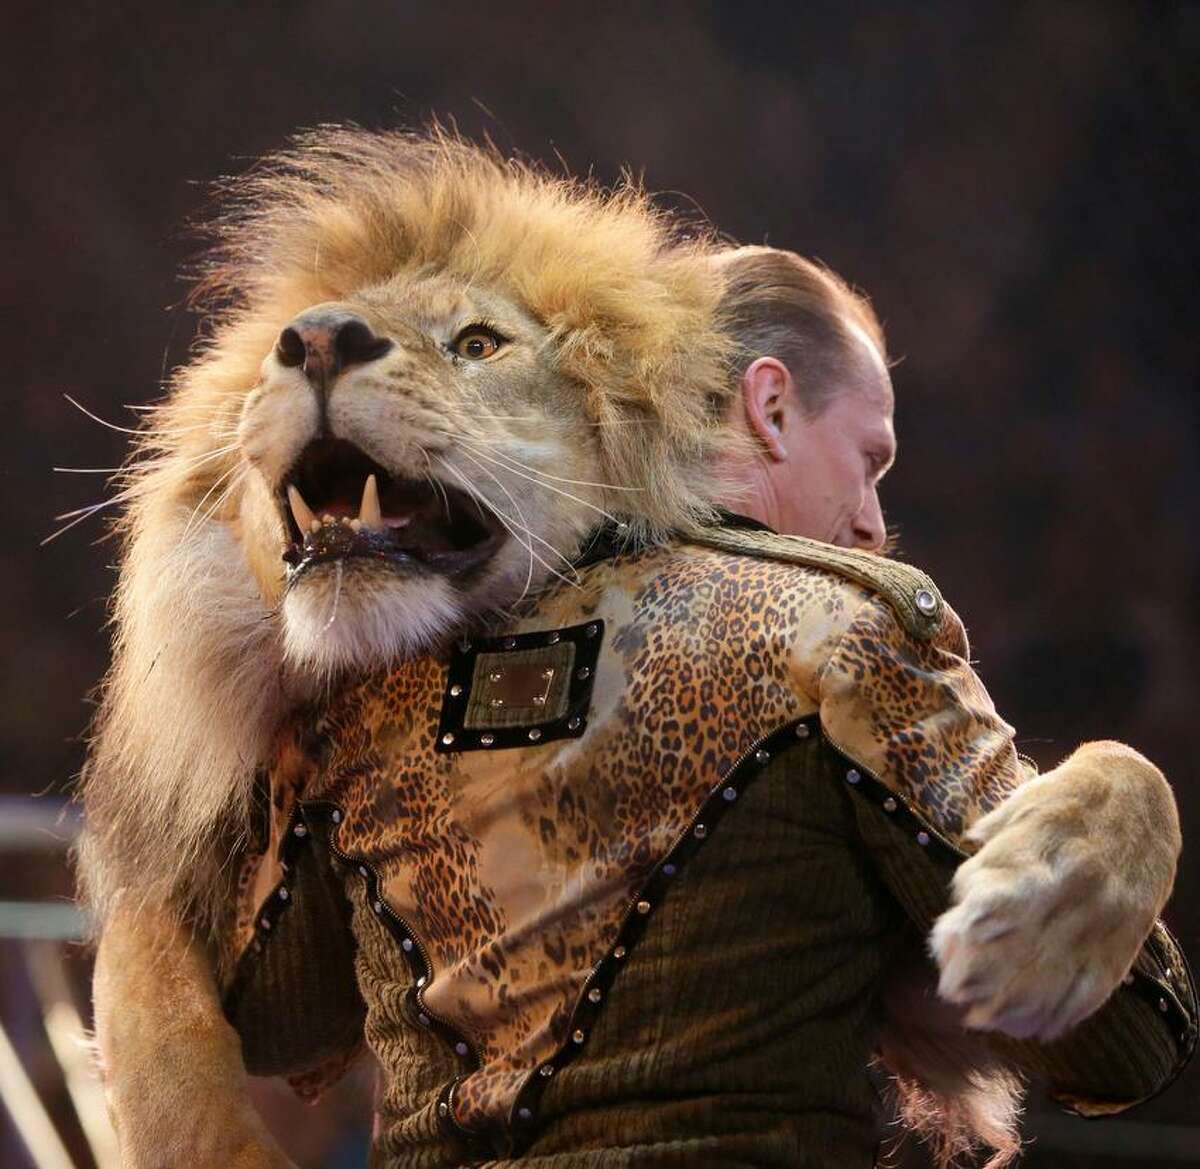 Oleksiy Pinko, a circus artist, dances with a lion during presentation of the new program in Ukraine's National Circus in Kiev, Ukraine, Wednesday, May 15, 2013. (AP Photo/Efrem Lukatsky)